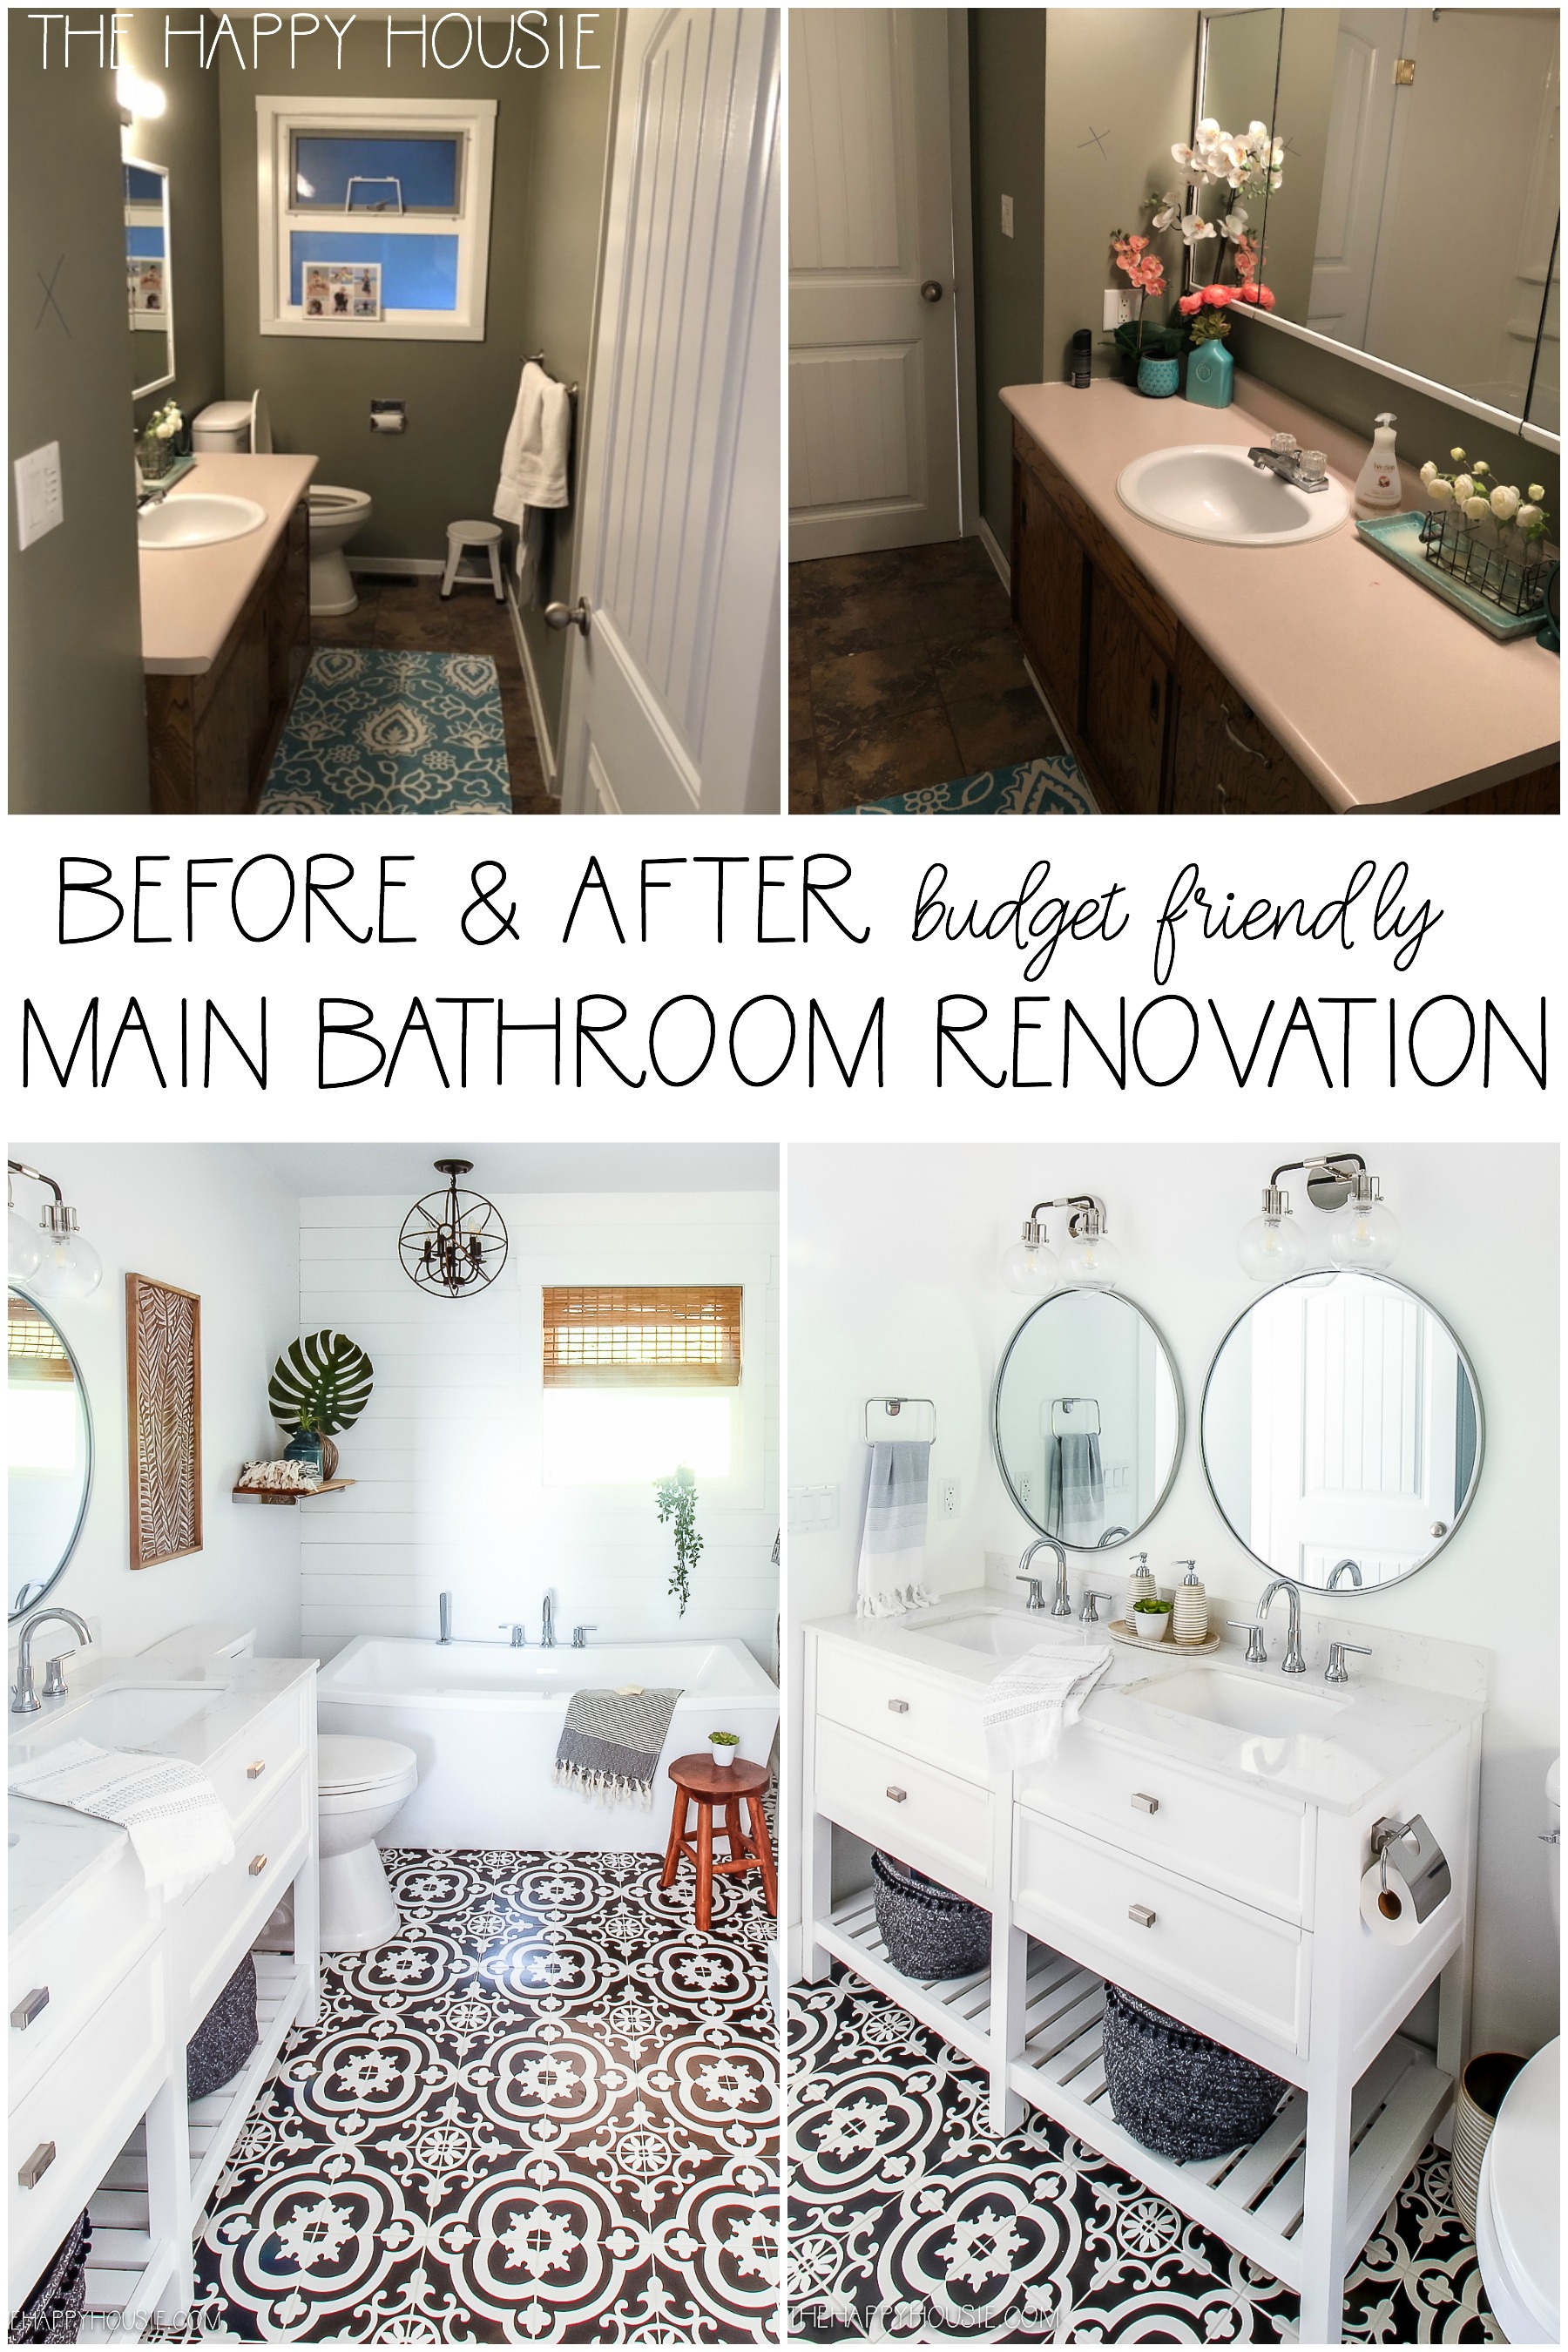 Before &nAfter budget friendly main bathroom renovation graphic.